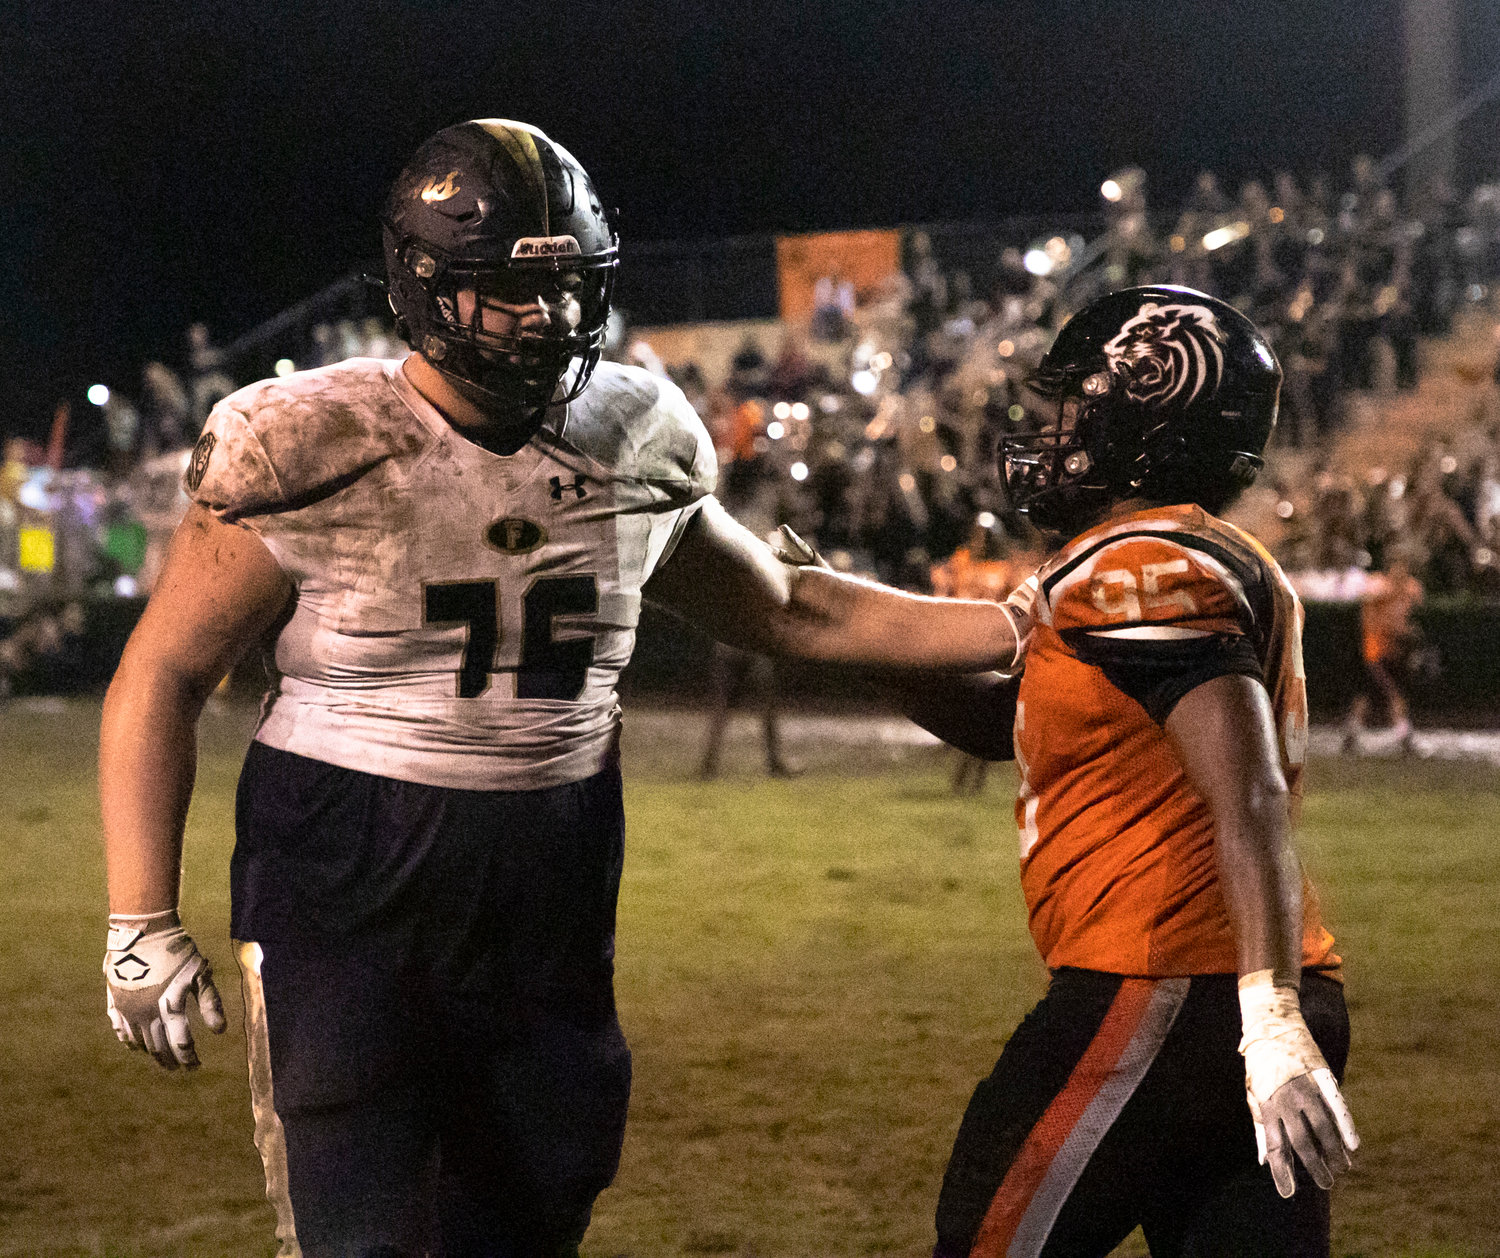 Linemen Logan Jollenbeck (76) and Kareem Stevens (95) acknowledge each other after Friday night’s non-region contest between the Foley Lions and Baldwin County Tigers in Bay Minette Aug. 26.